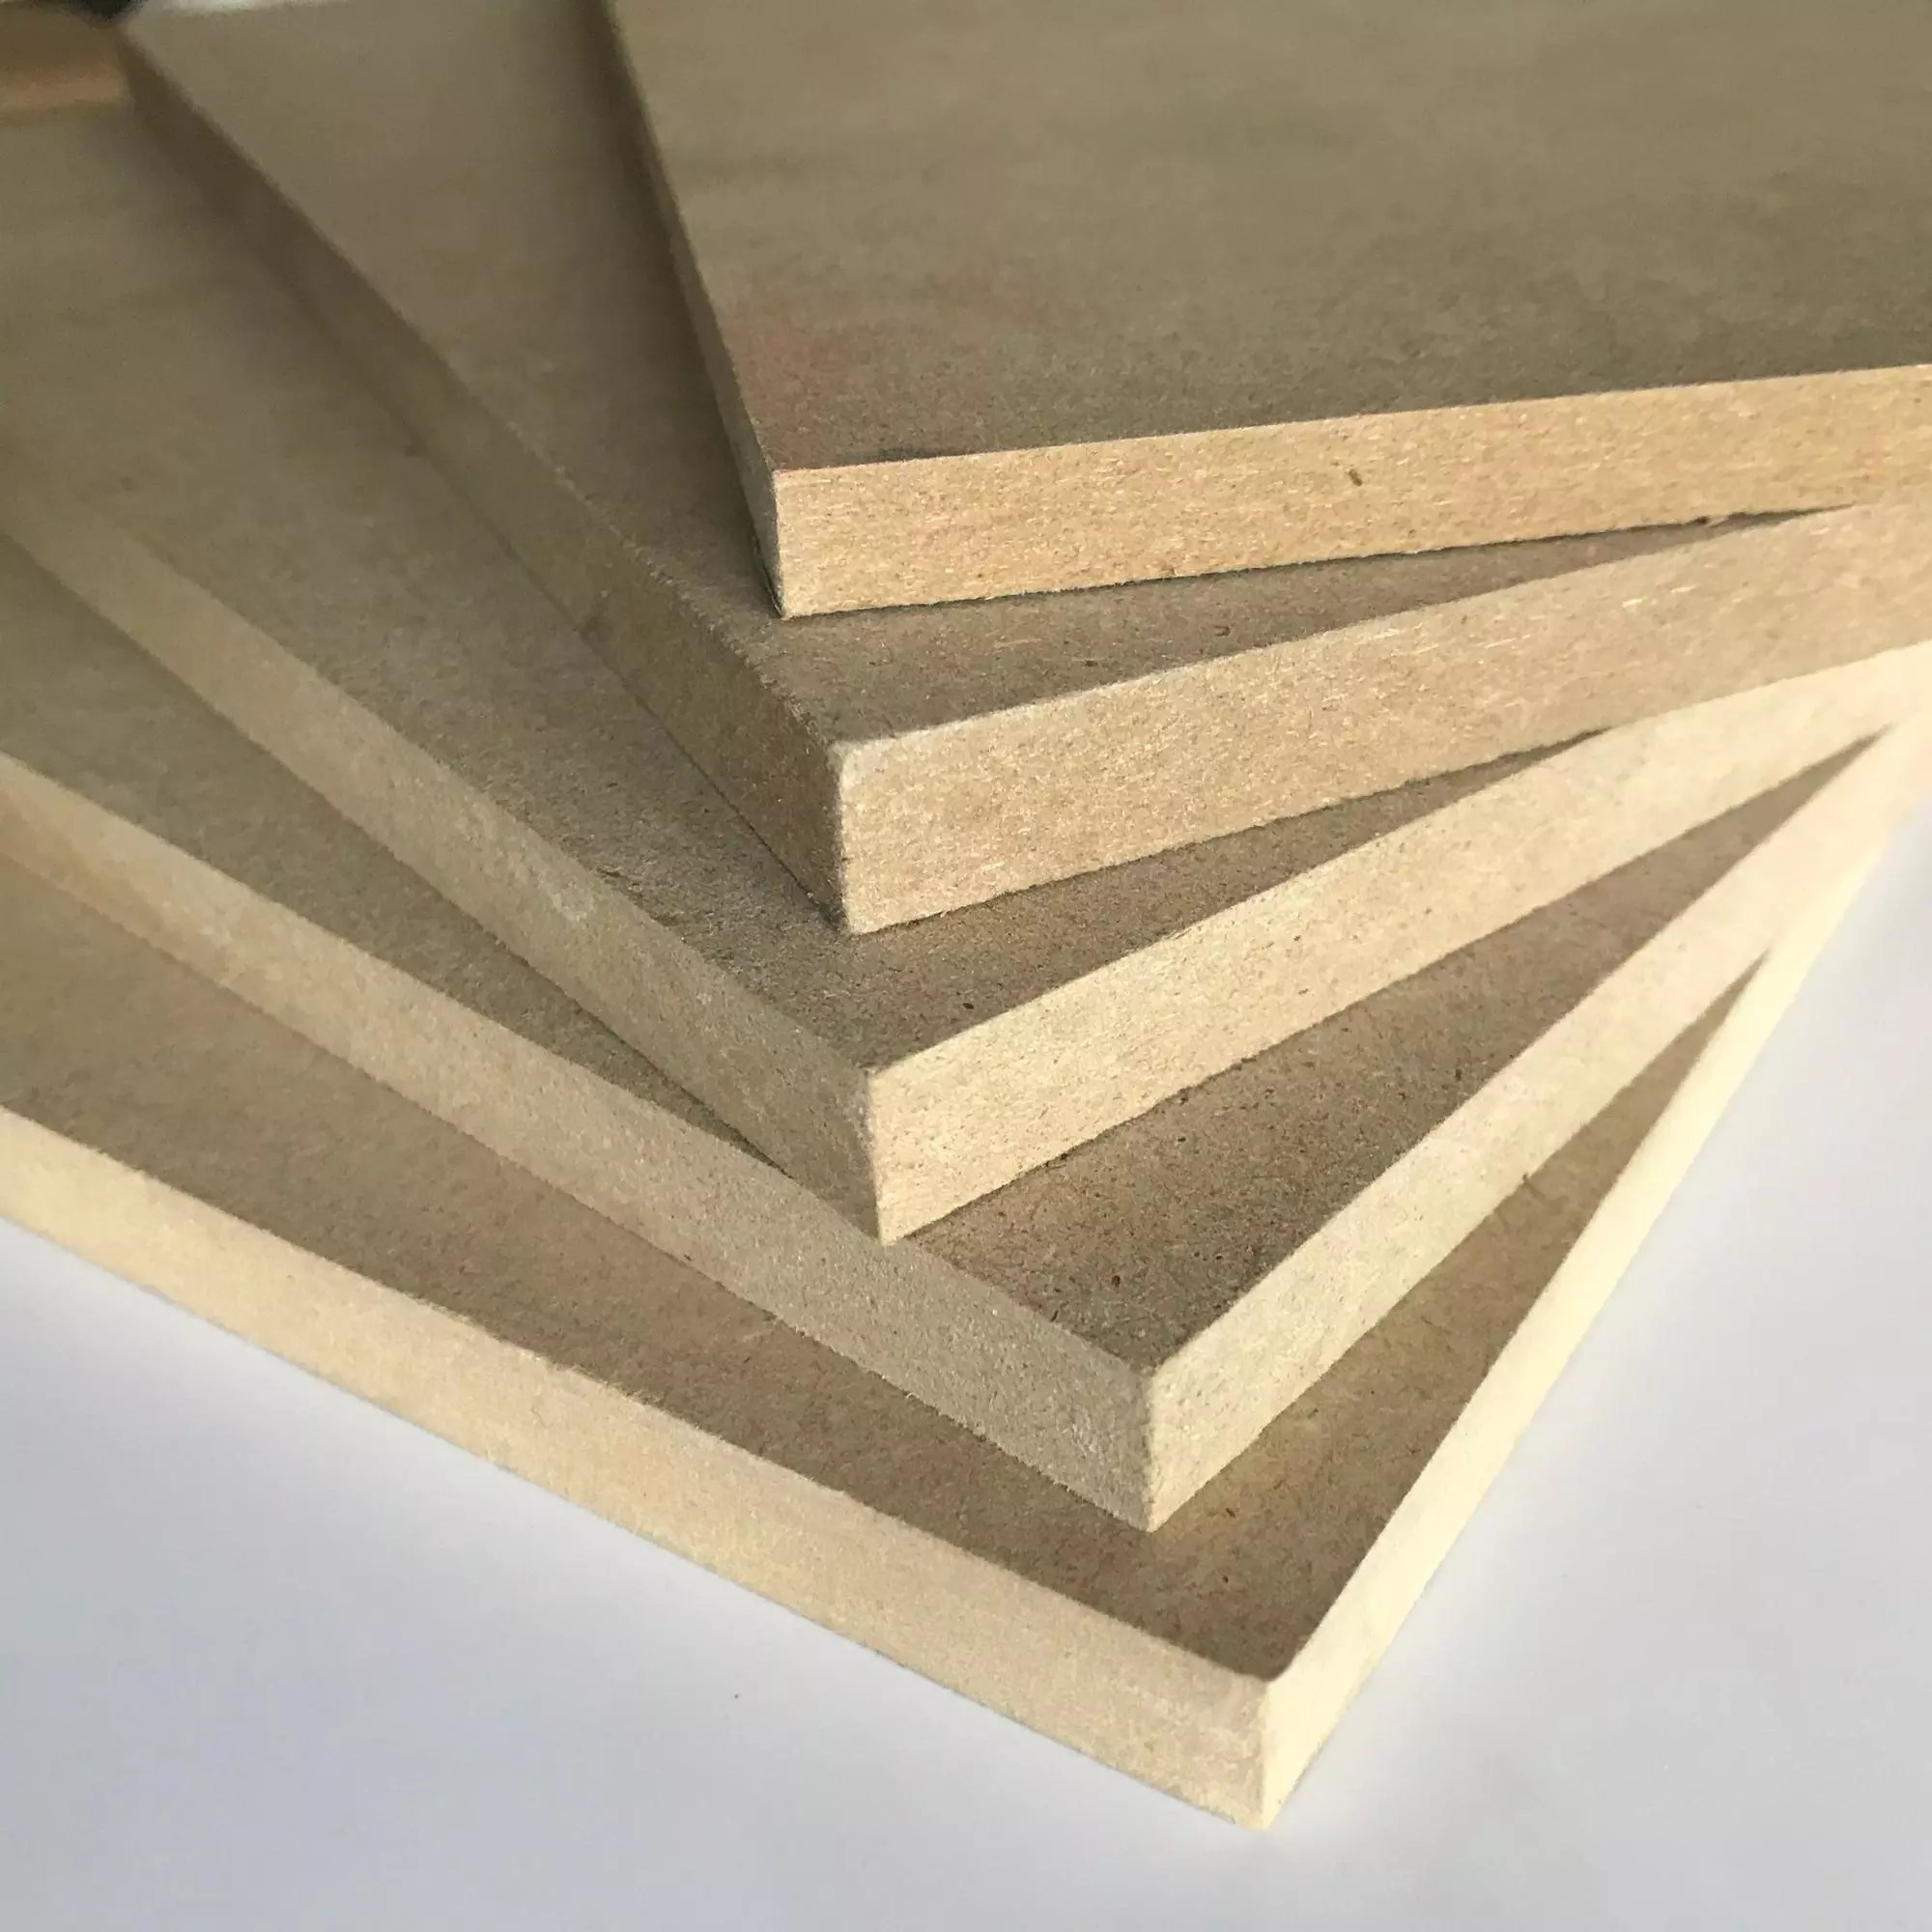  Thickness 1.8 - 30mm Melamine Faced MDF Board 8% - 14% Moisture Content Manufactures